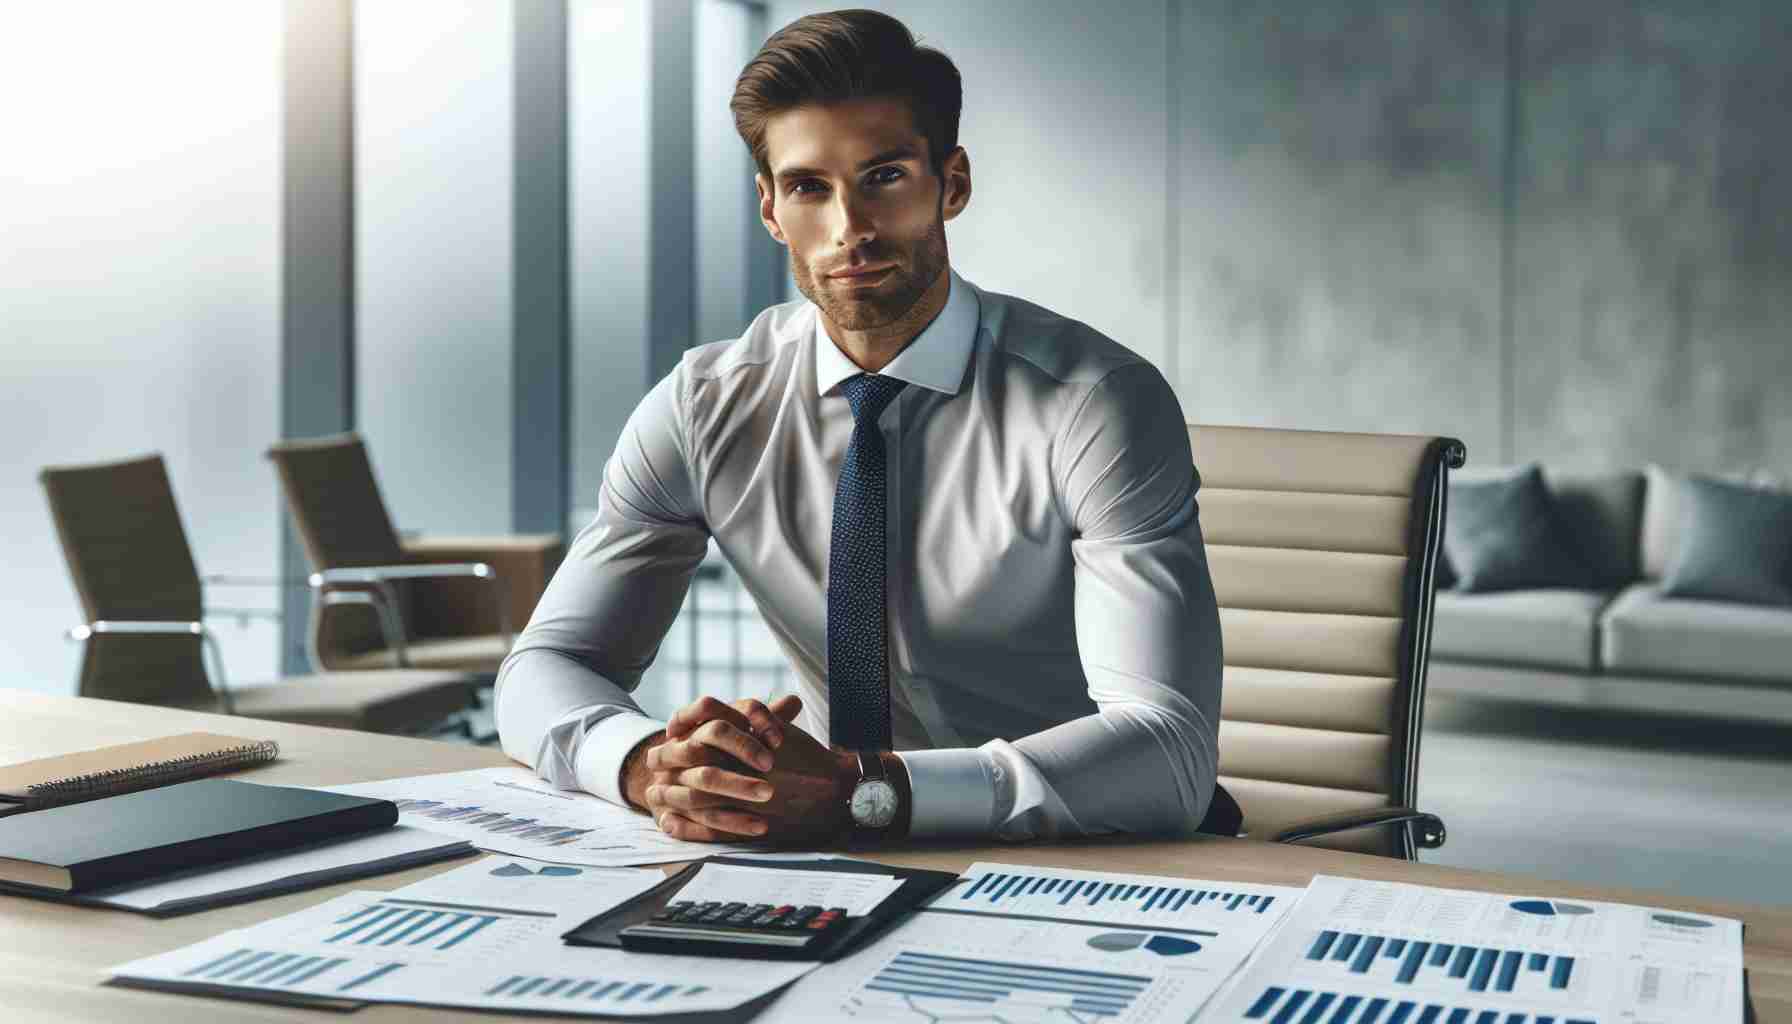 Realistic HD photo of a man with a leadership role in a modern white-collar company, positioned at an office desk with financial reports scattered on it, looking confident and ready to make significant decisions. Explore how his physical demeanor expresses his readiness for responsibilities. He should be wearing a formal shirt and tie, indicative of a corporate environment.